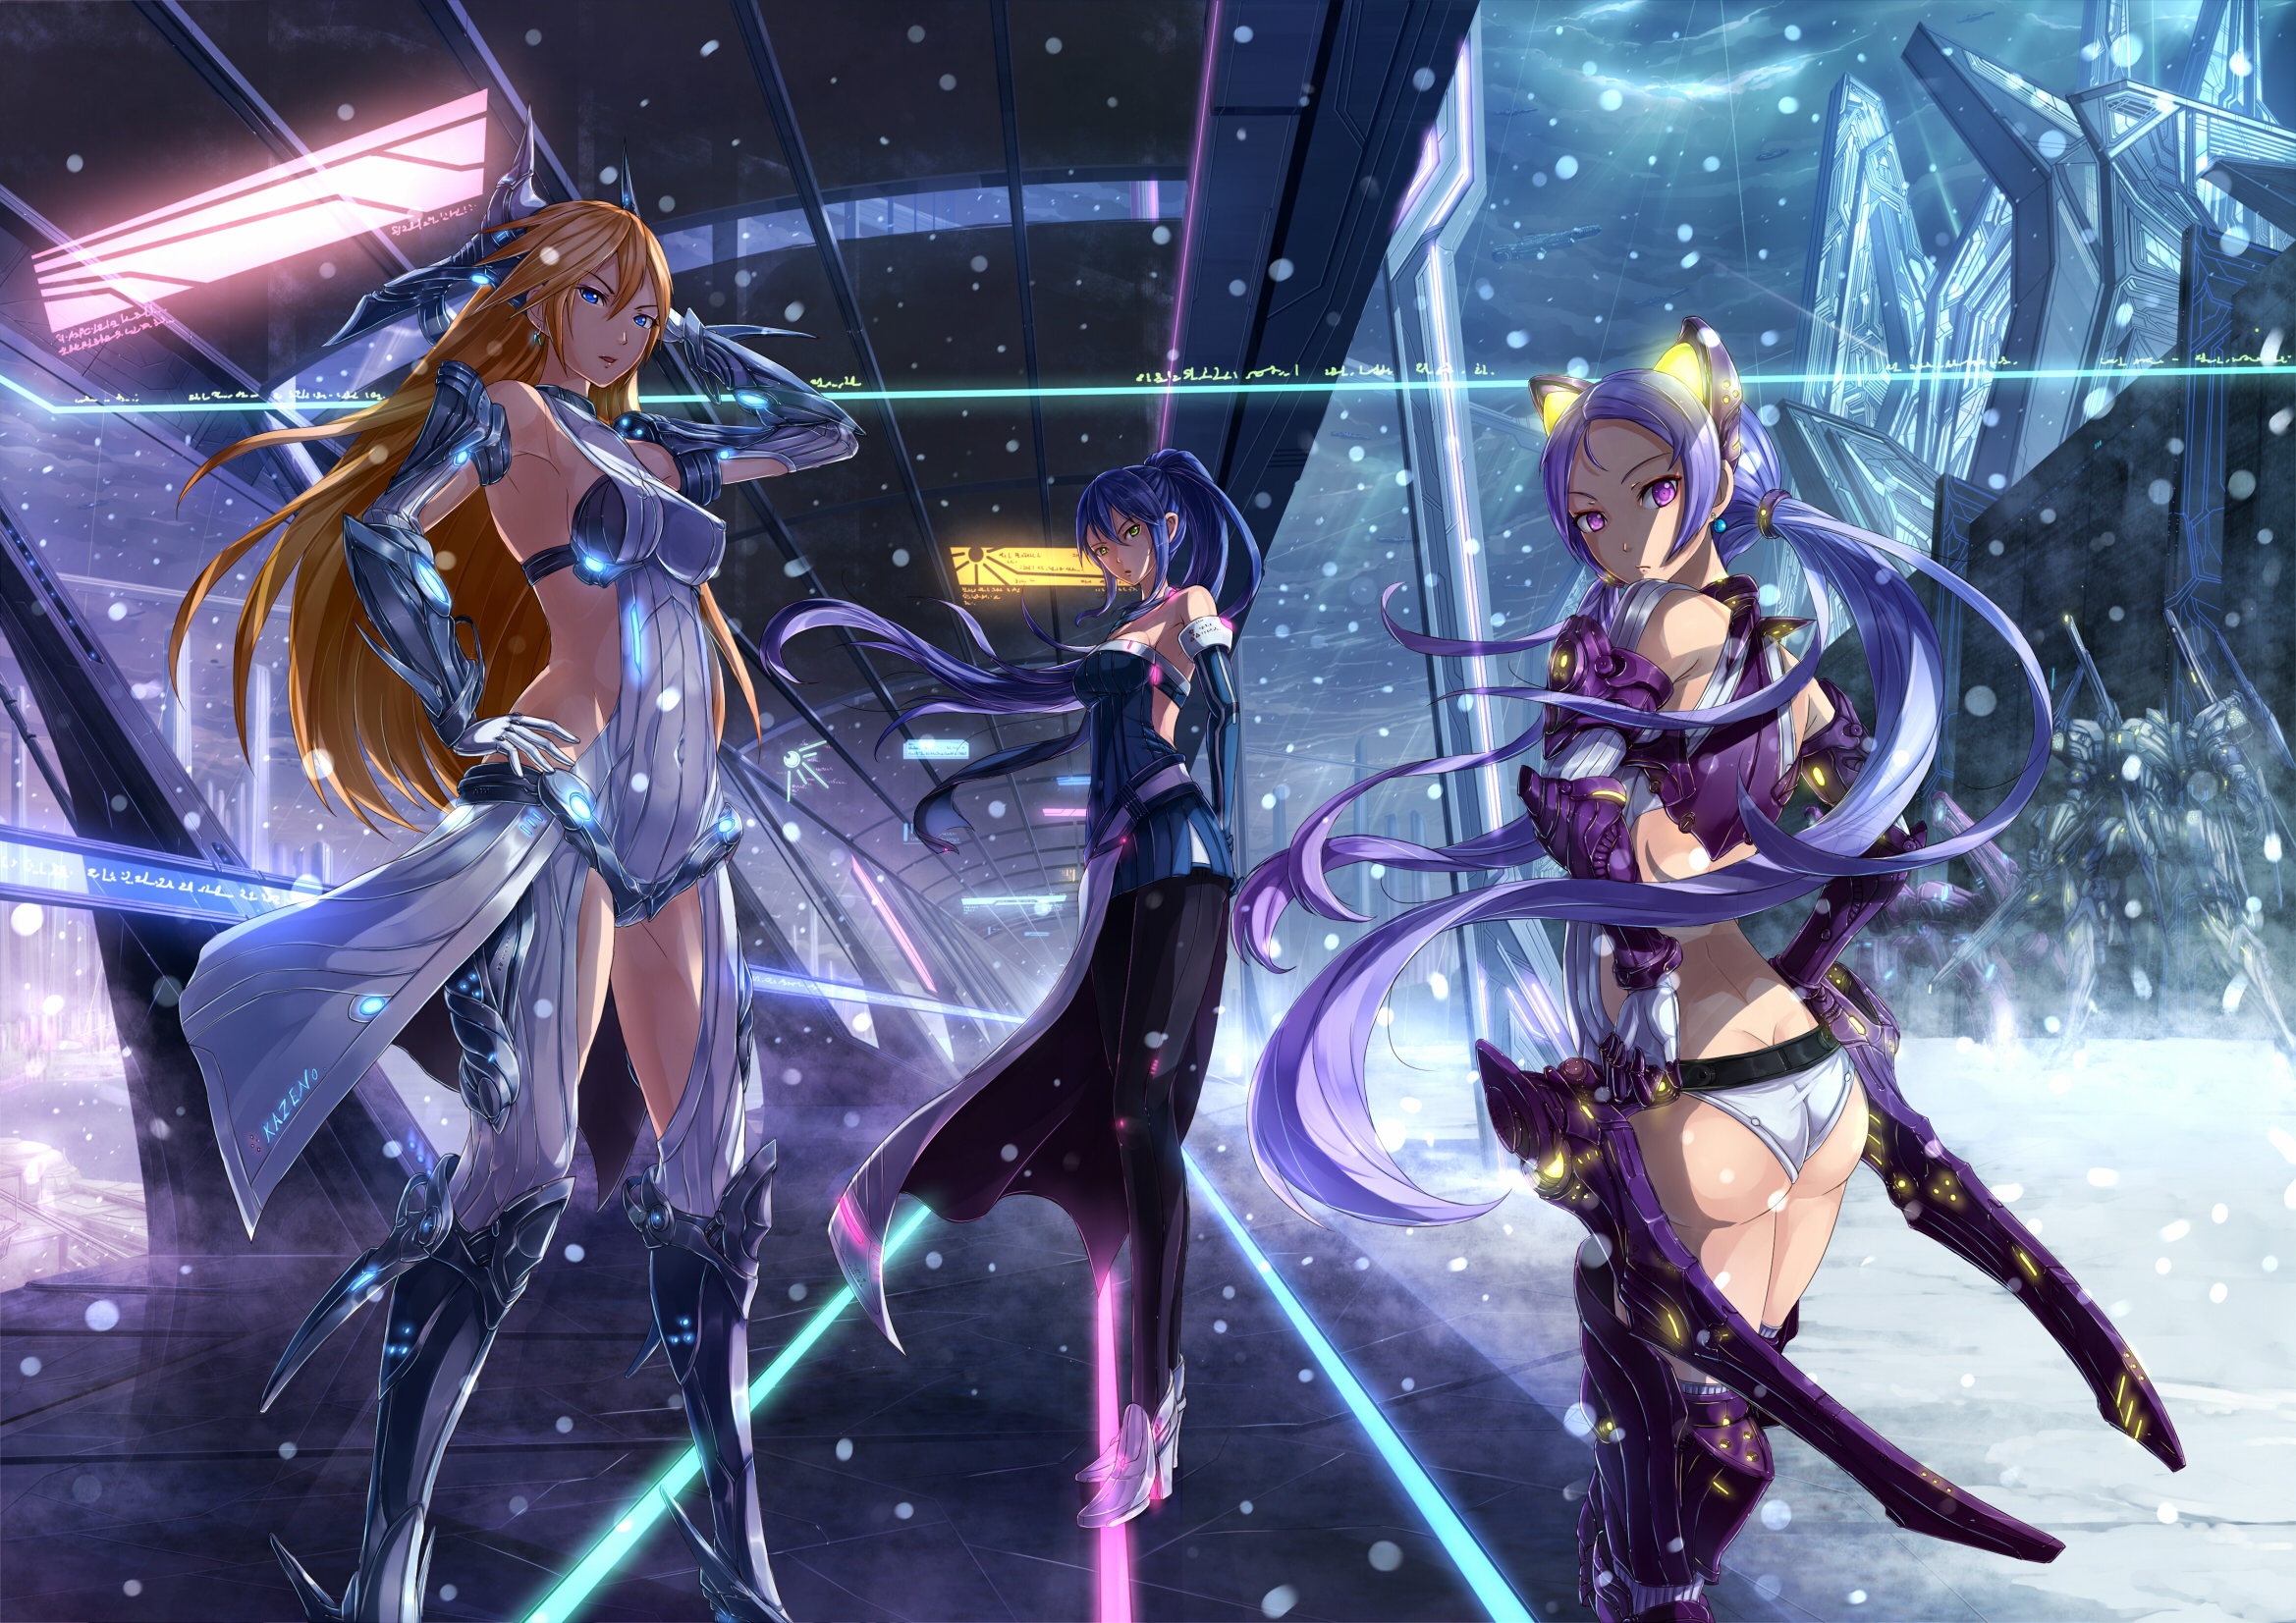 action anime wallpaper,cg artwork,action adventure game,anime,fictional character,games